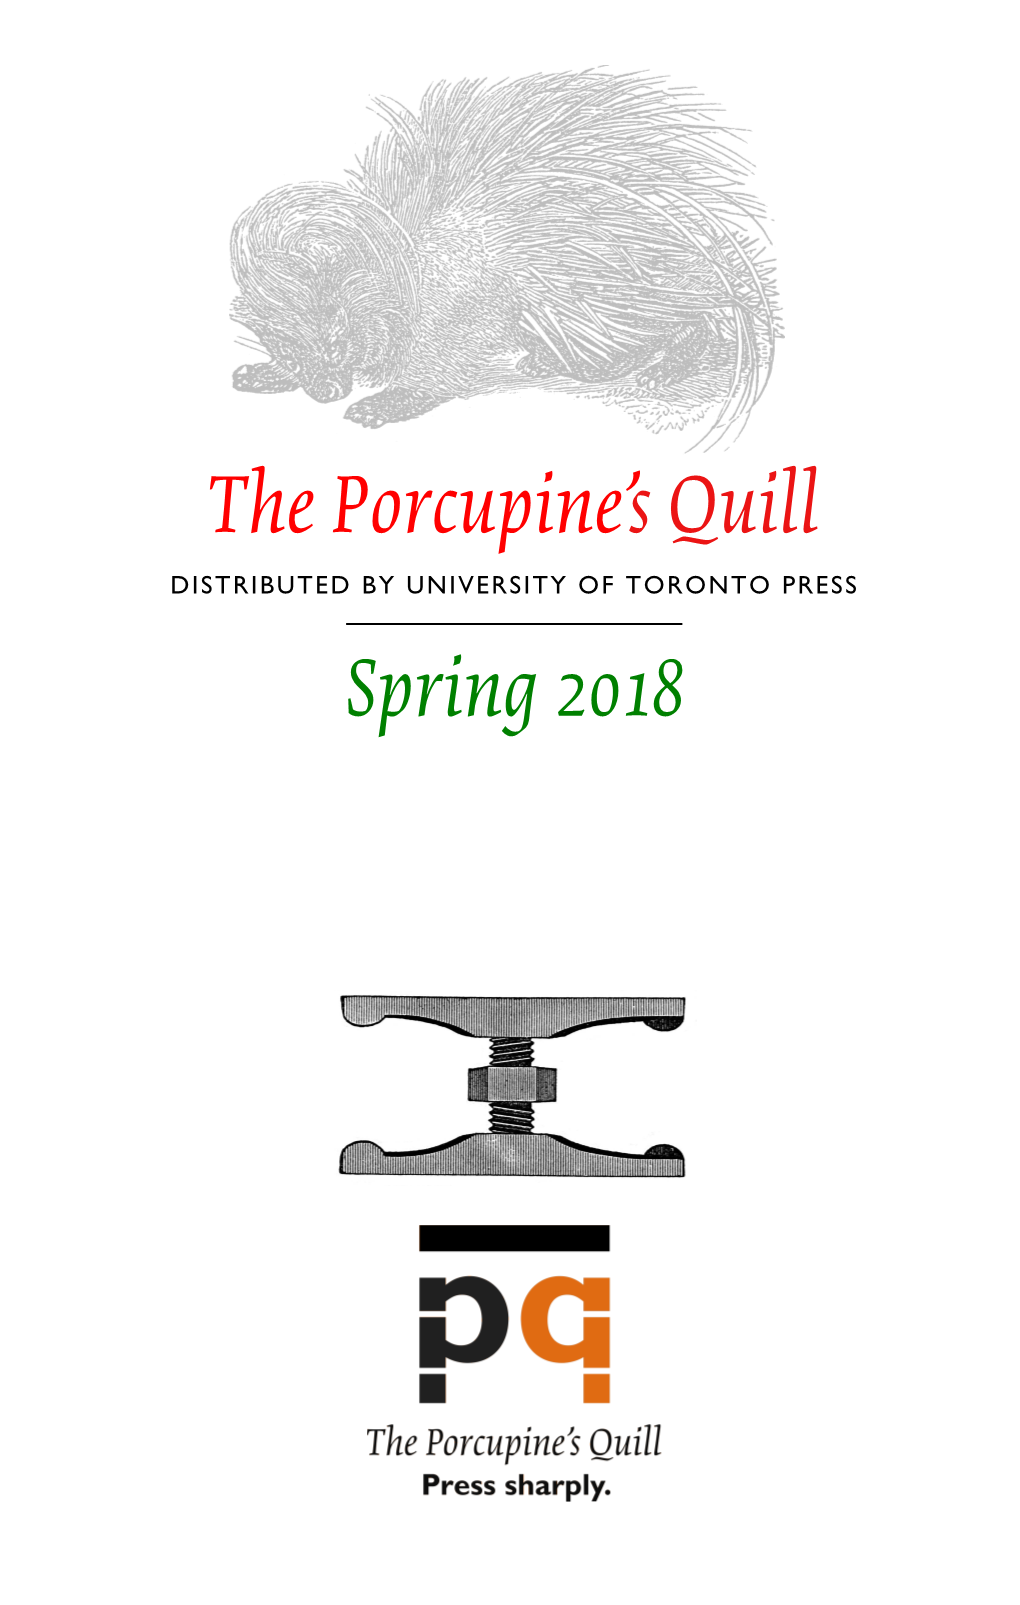 The Porcupine's Quill Spring 2018